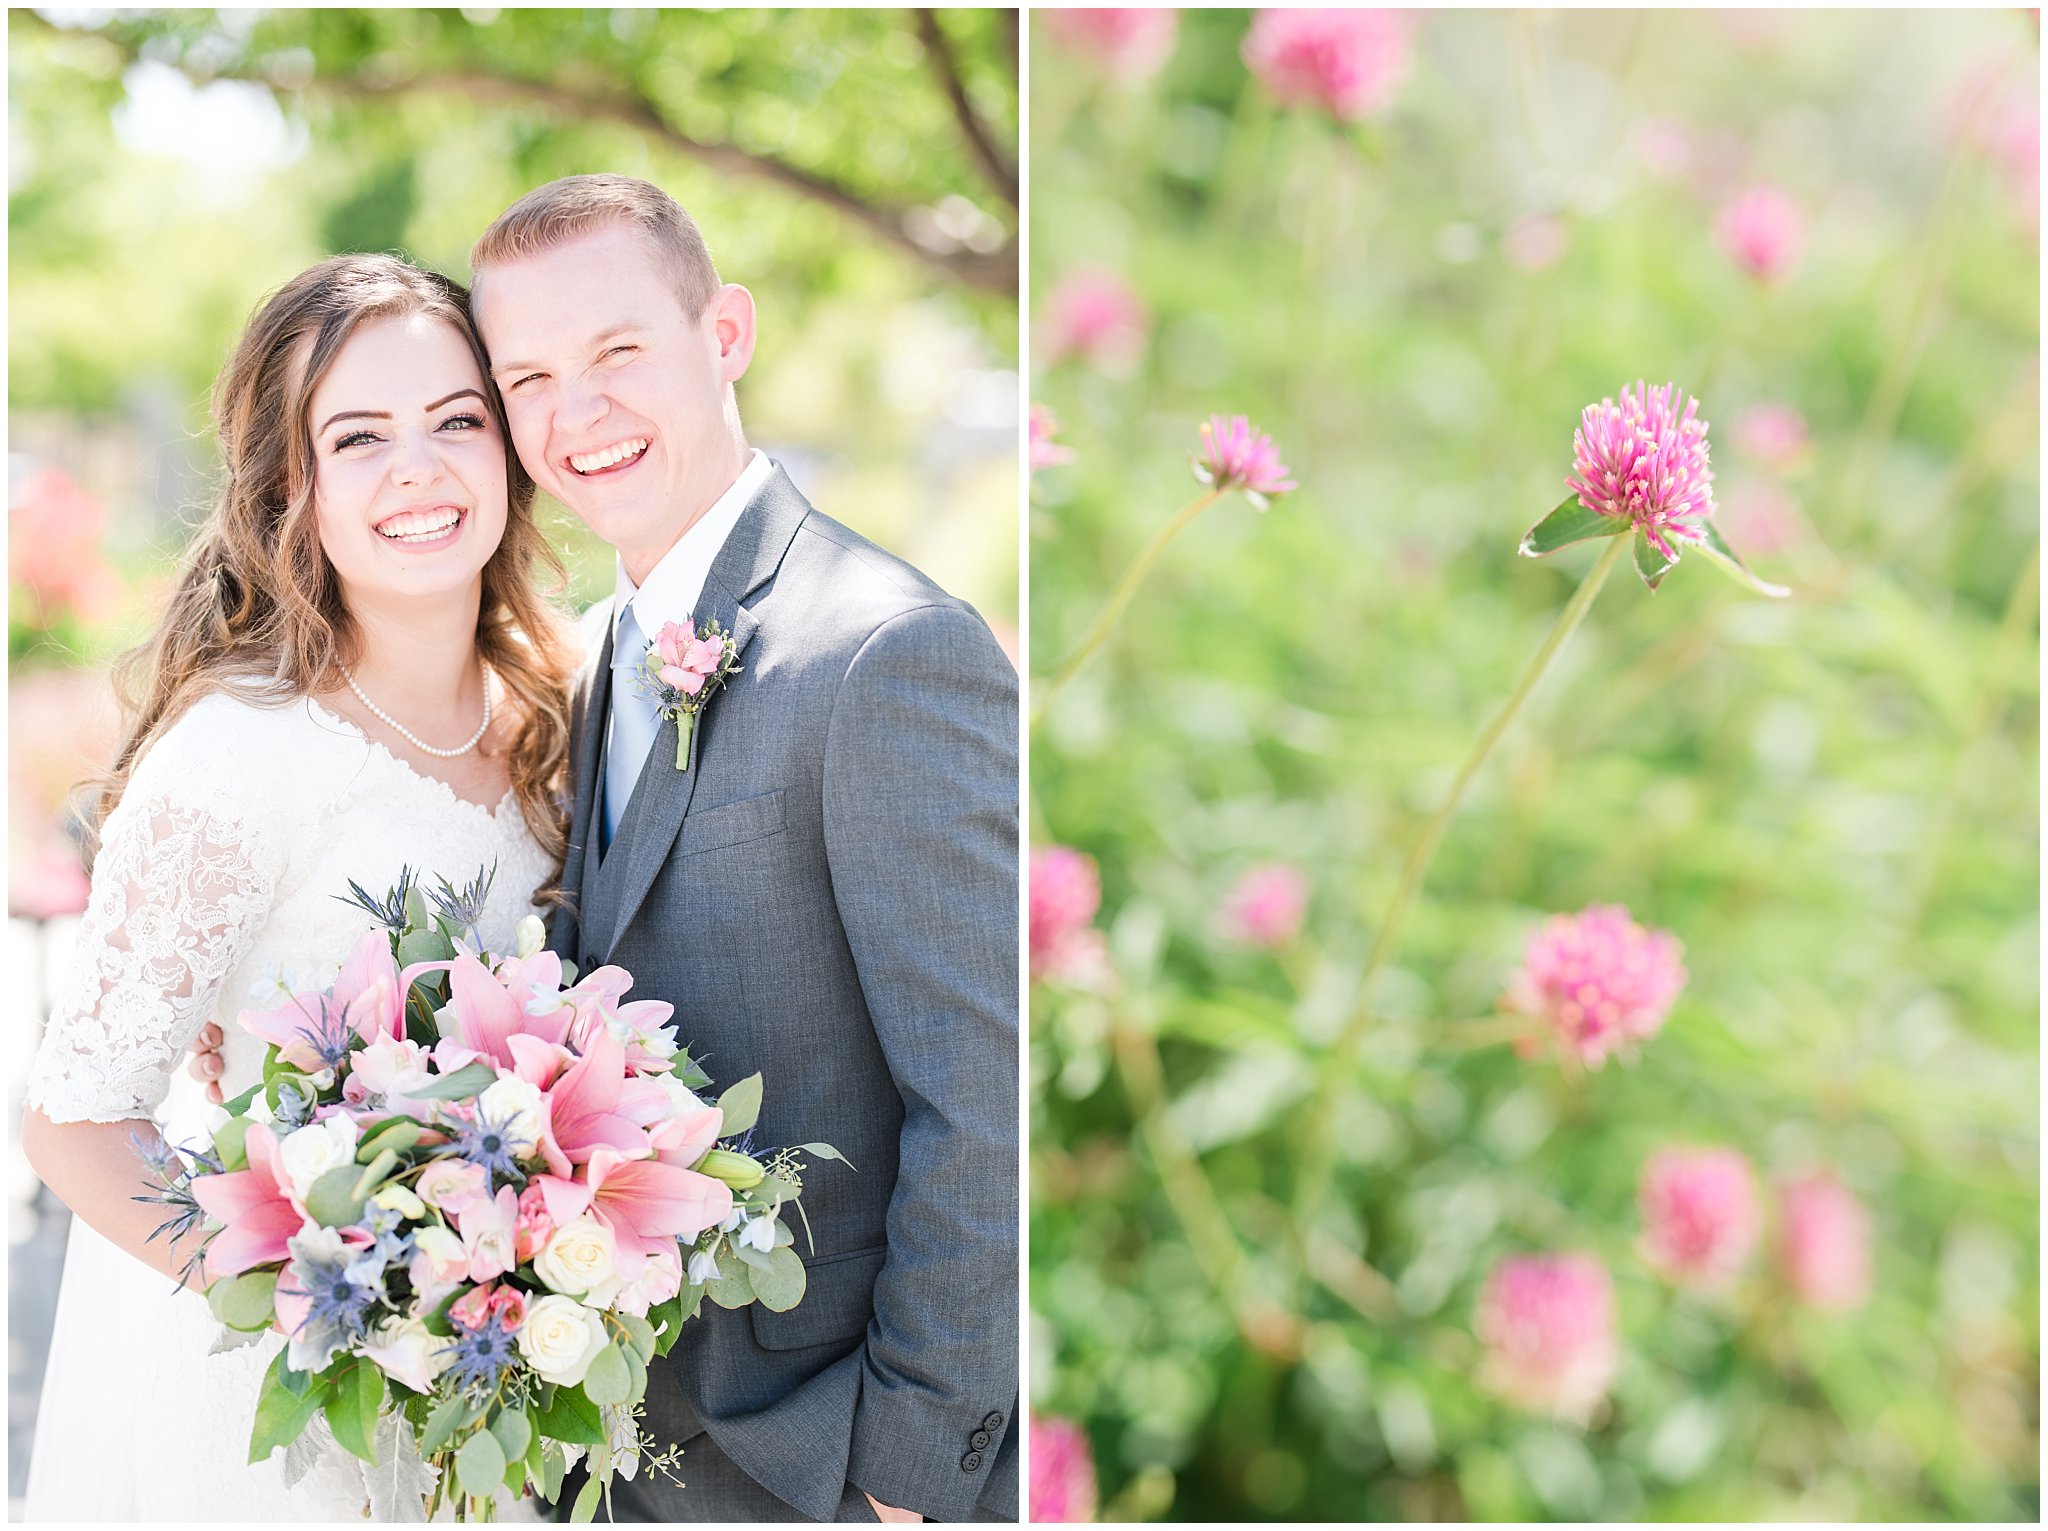 Bride with lace wedding dress, tropical bouquet, and veil and groom wearing grey suit with light blue tie | bride and groom portraits | Ogden Temple Summer Wedding | Jessie and Dallin Photography